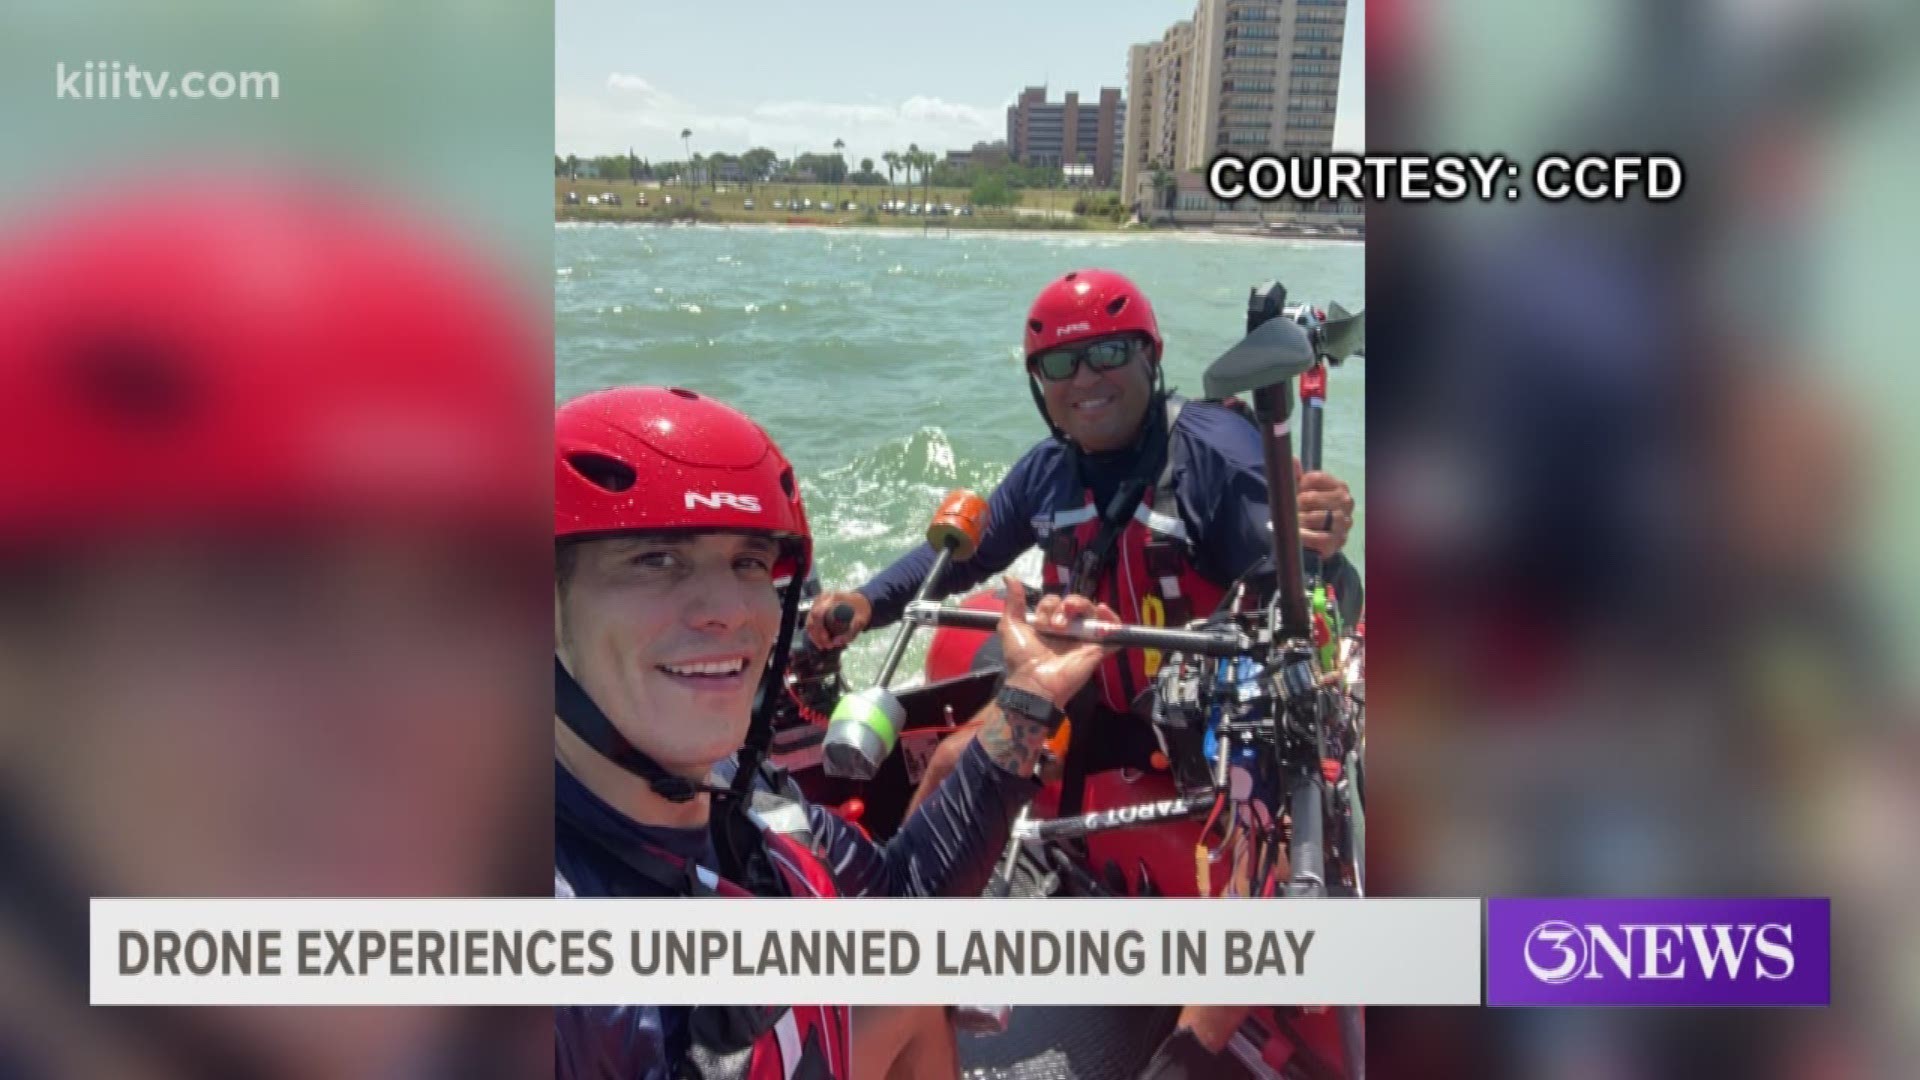 The first day of NASA drone testing along the Corpus Christi bay front hit a snag Thursday when one of the drones experienced a malfunction while up in the air over Cole Park and ended up in the nearby water.